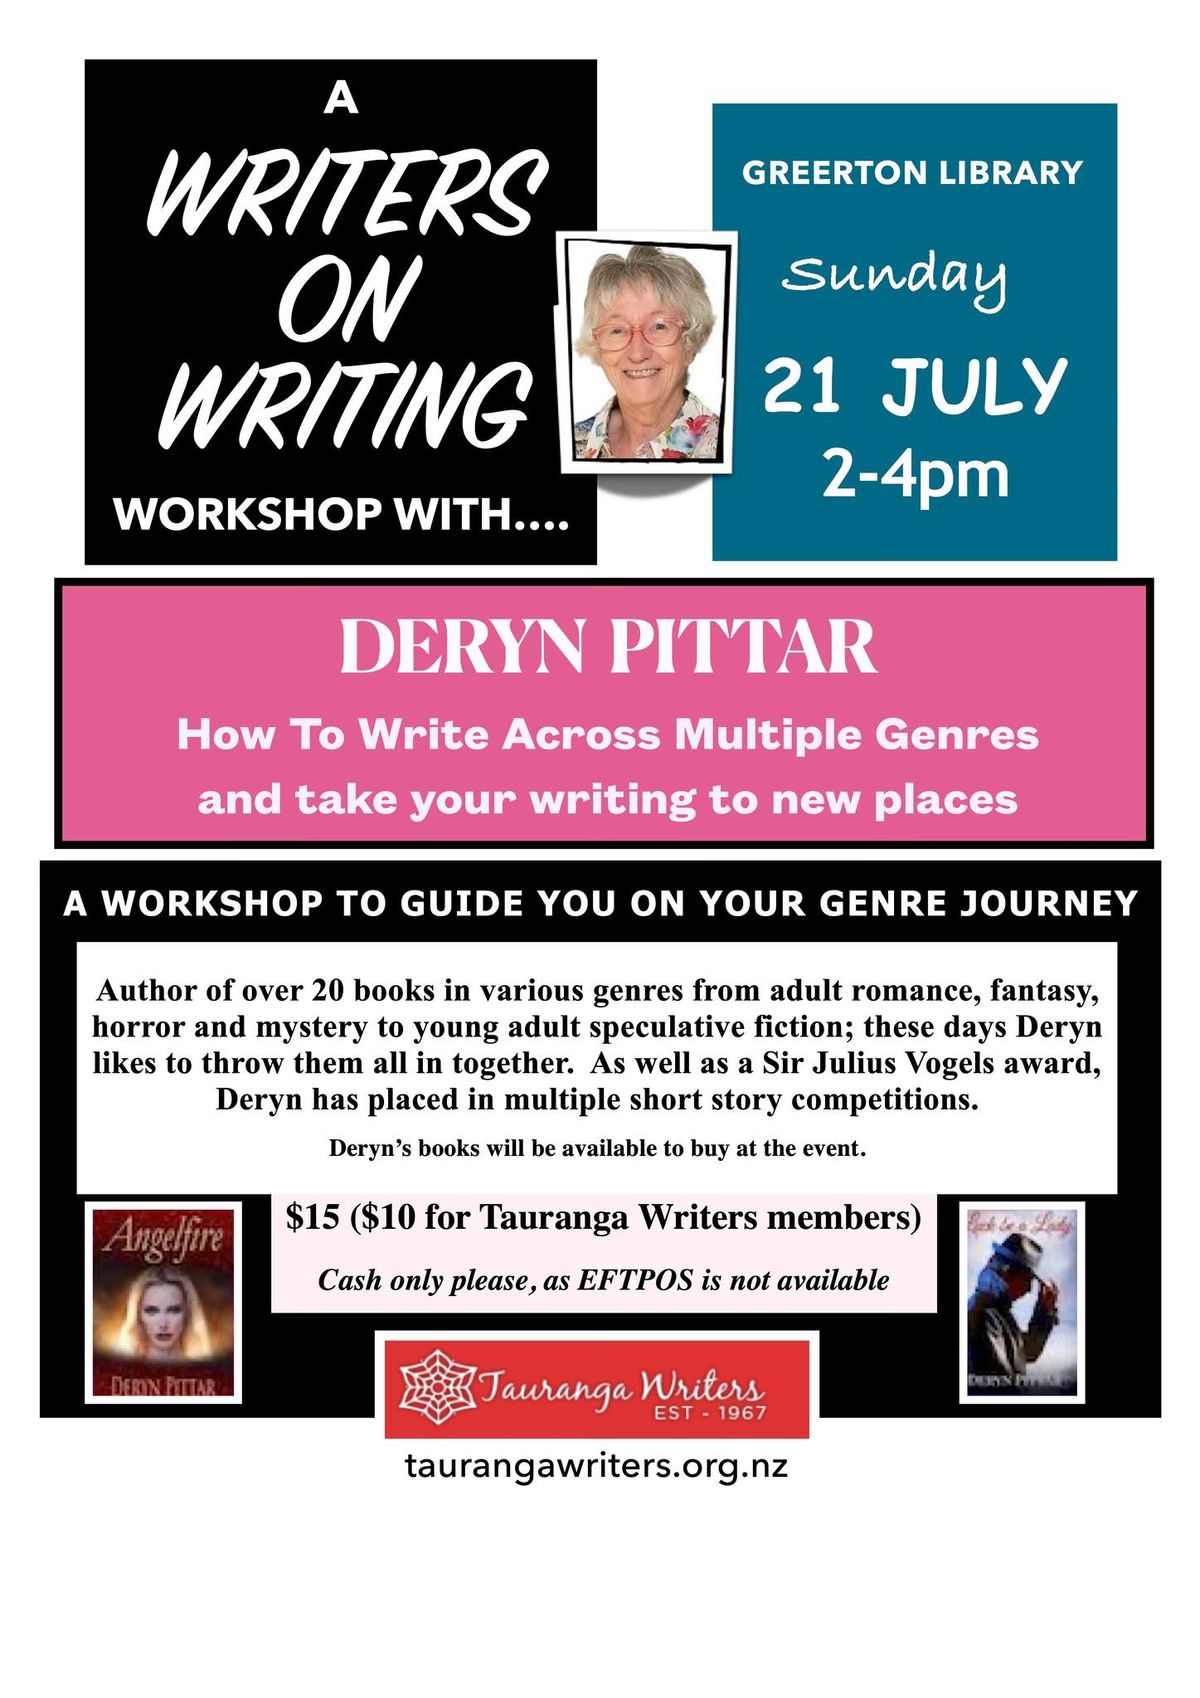 What Genre? - A Writers On Writing Event